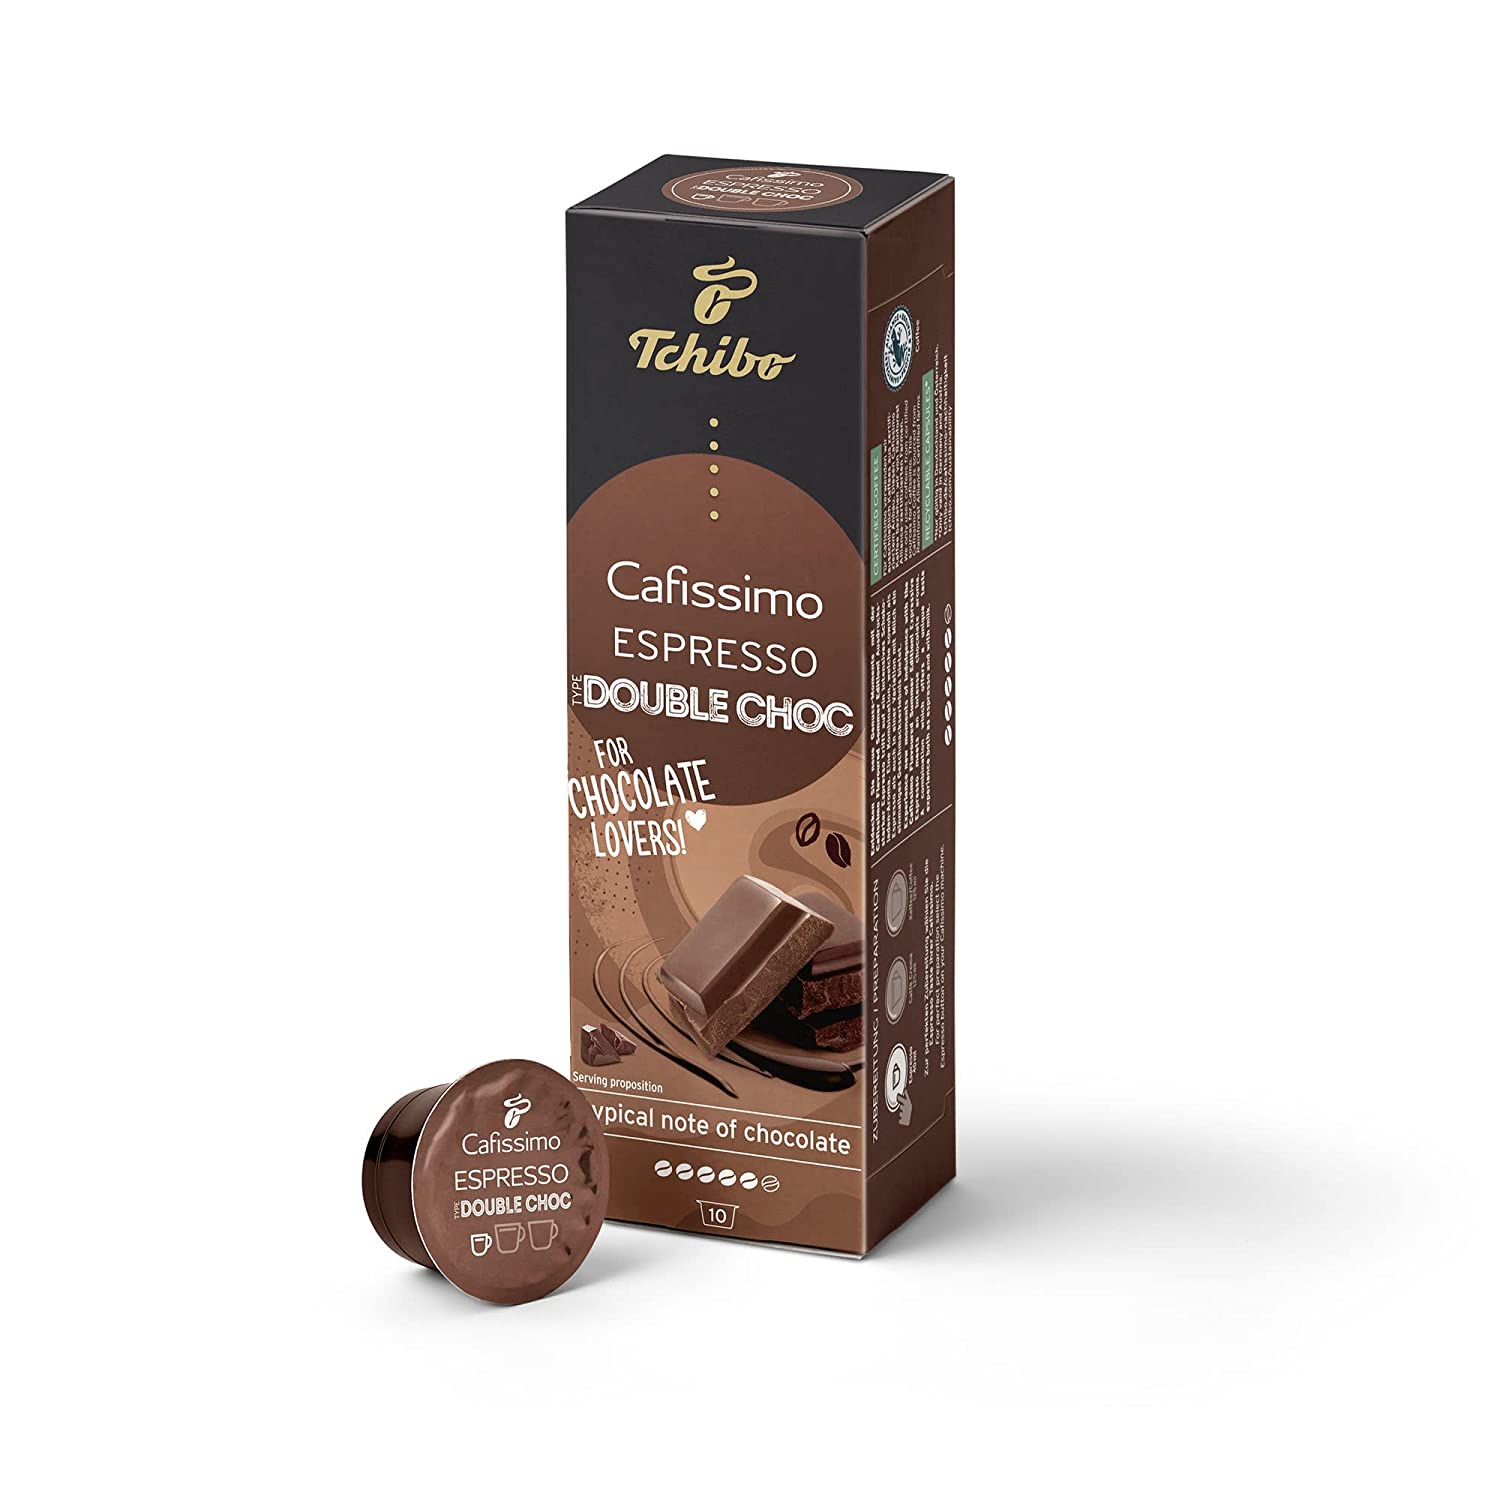 Tchibo Cafissimo Flavoured Summer Edition Espresso Double Choc Coffee Capsules, 10 pieces, sustainably & fairly traded, Premium quality